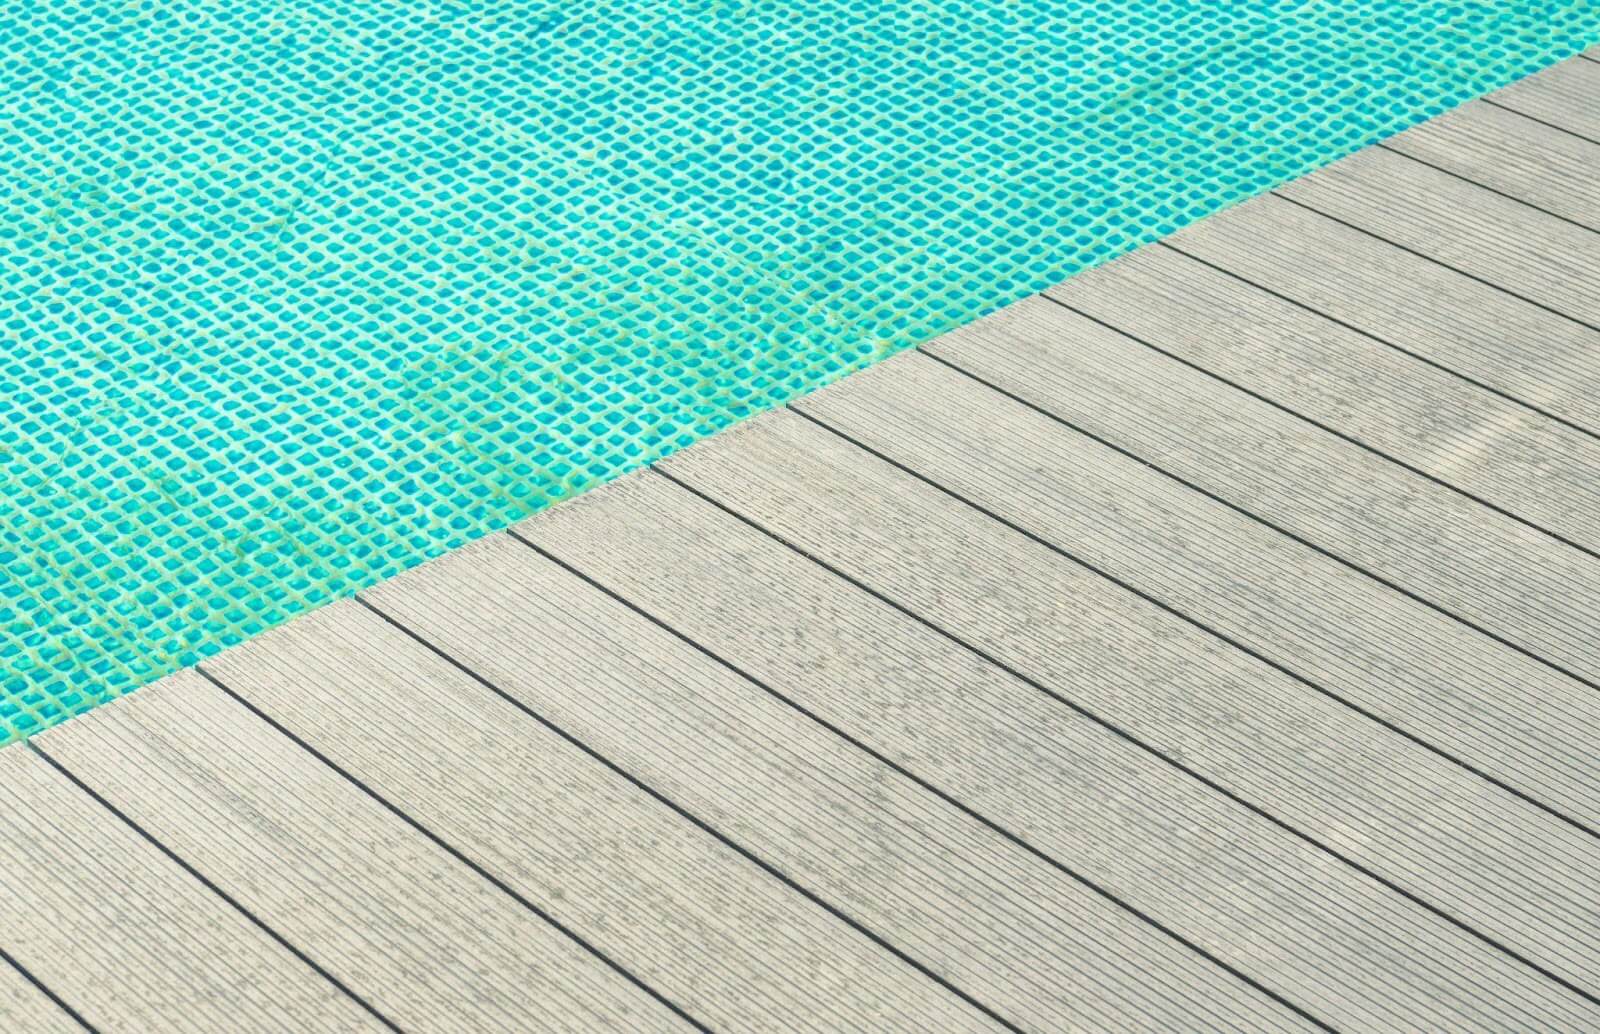 6 Common Misconceptions About Composite Decking - Tulou